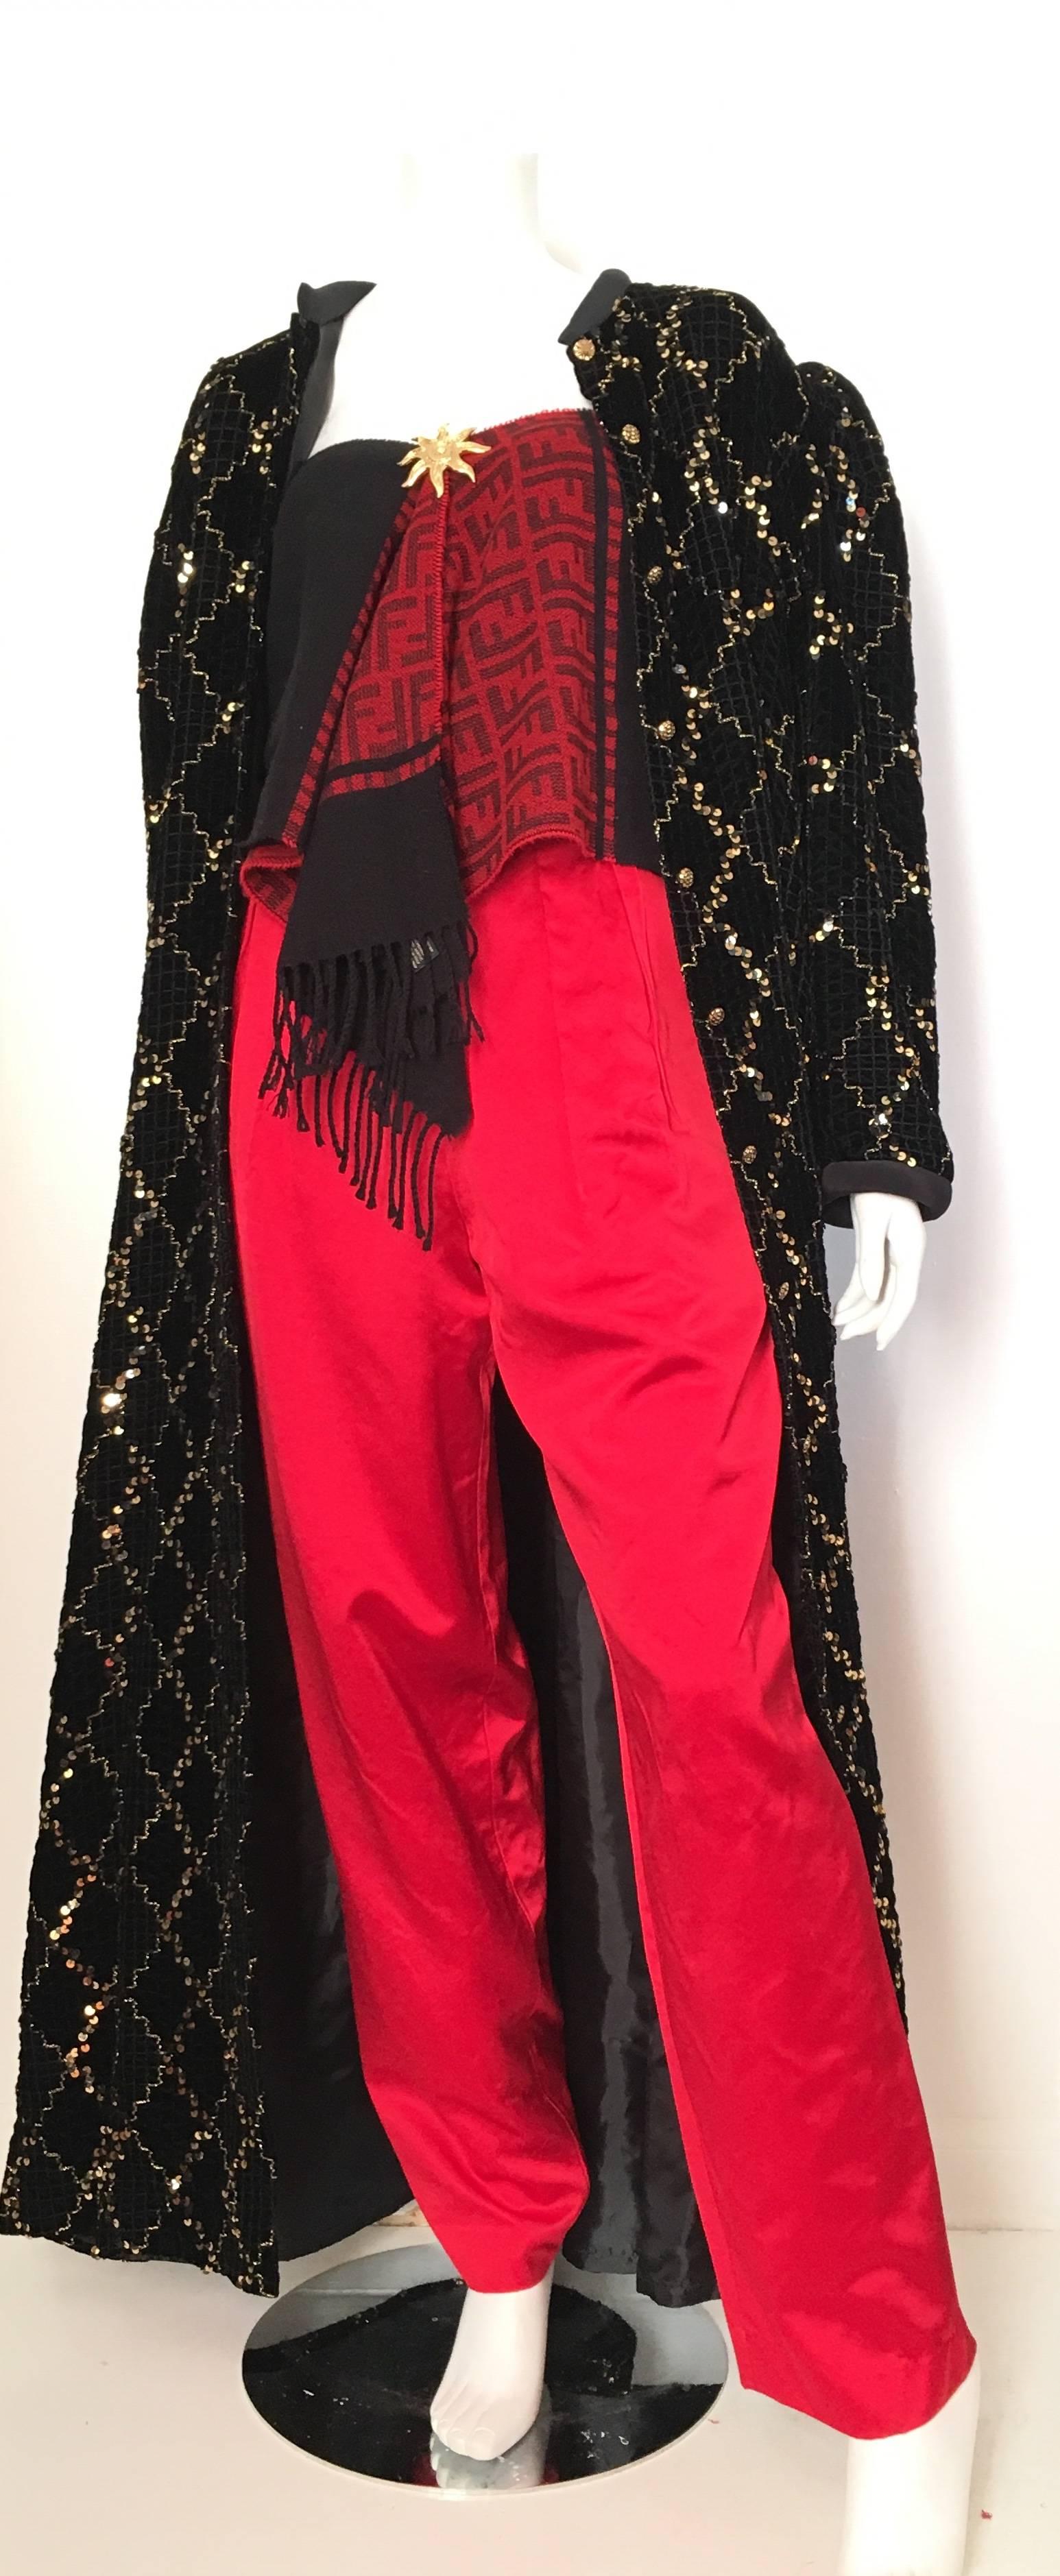 David Brown for Neiman Marcus 1980s black velvet with gold & black sequin evening button up coat is a size large and will fit an USA size 10/12.  This stunning David Brown black velvet evening coat can be worn as a dress, so your options are